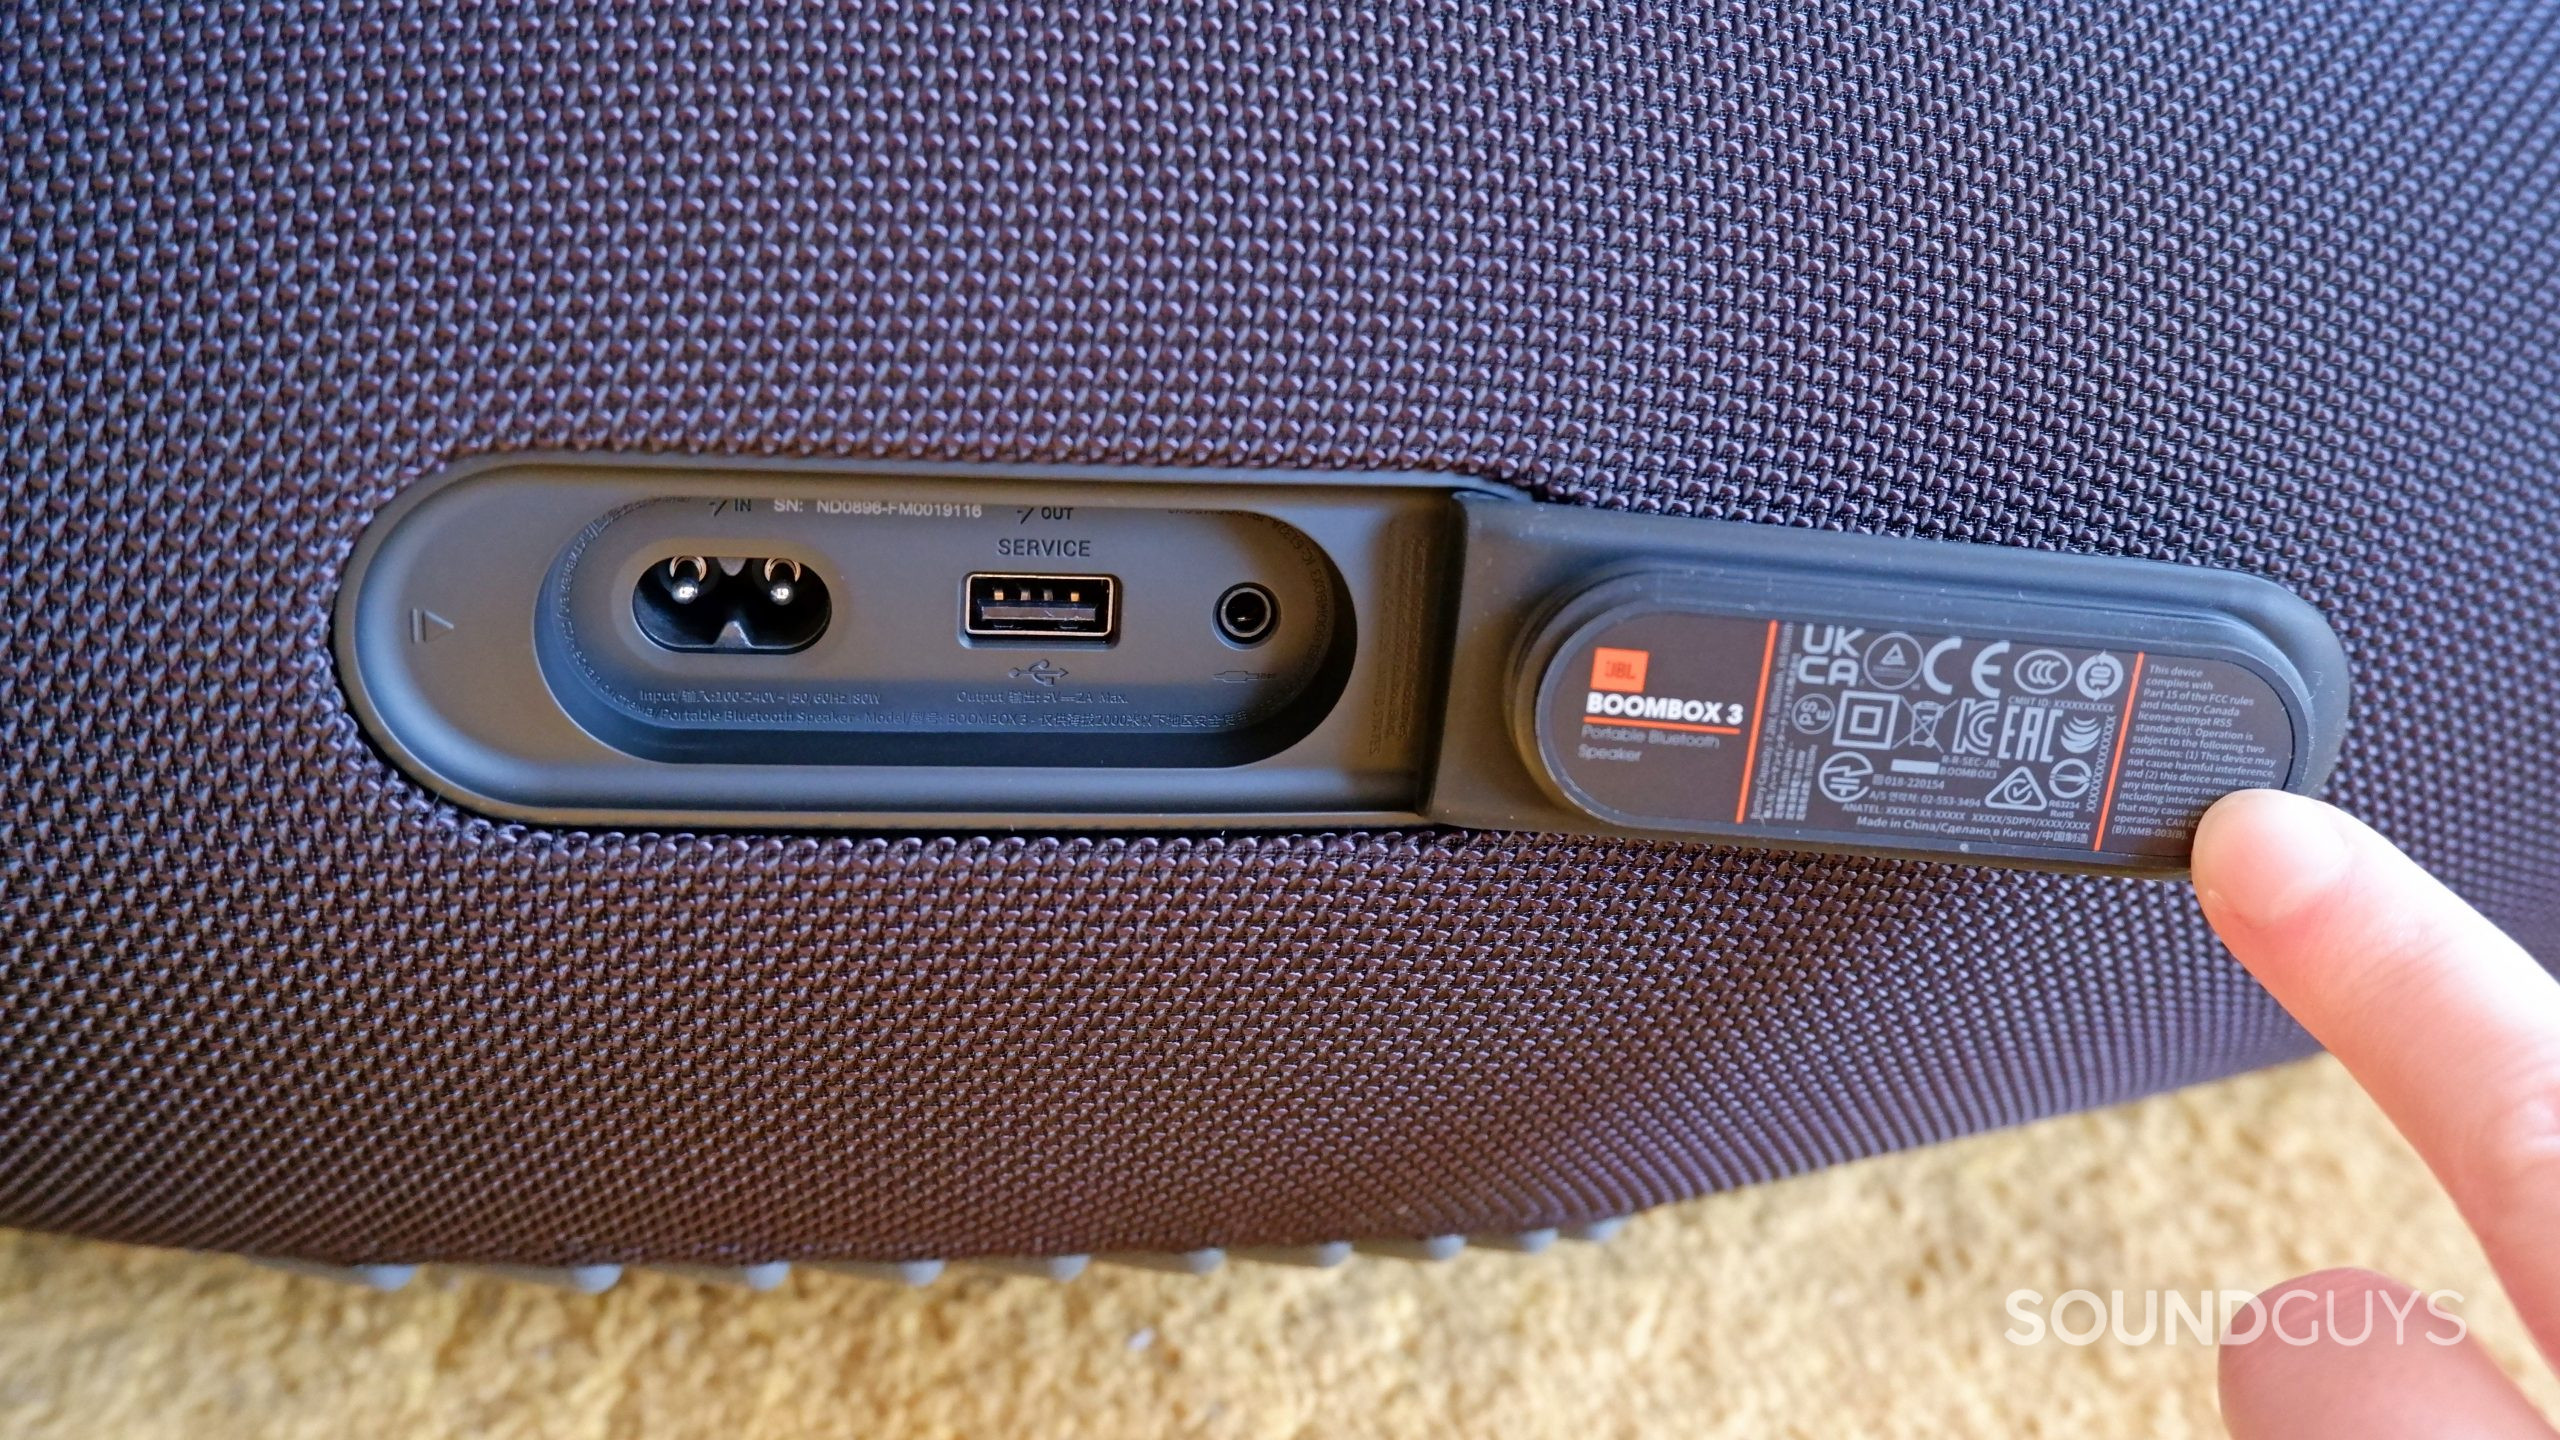 The ports on the back of the JBL Boombox 3, with the power port on the left, the USB-A service port in the middle, and the 3.5mm port on the right.